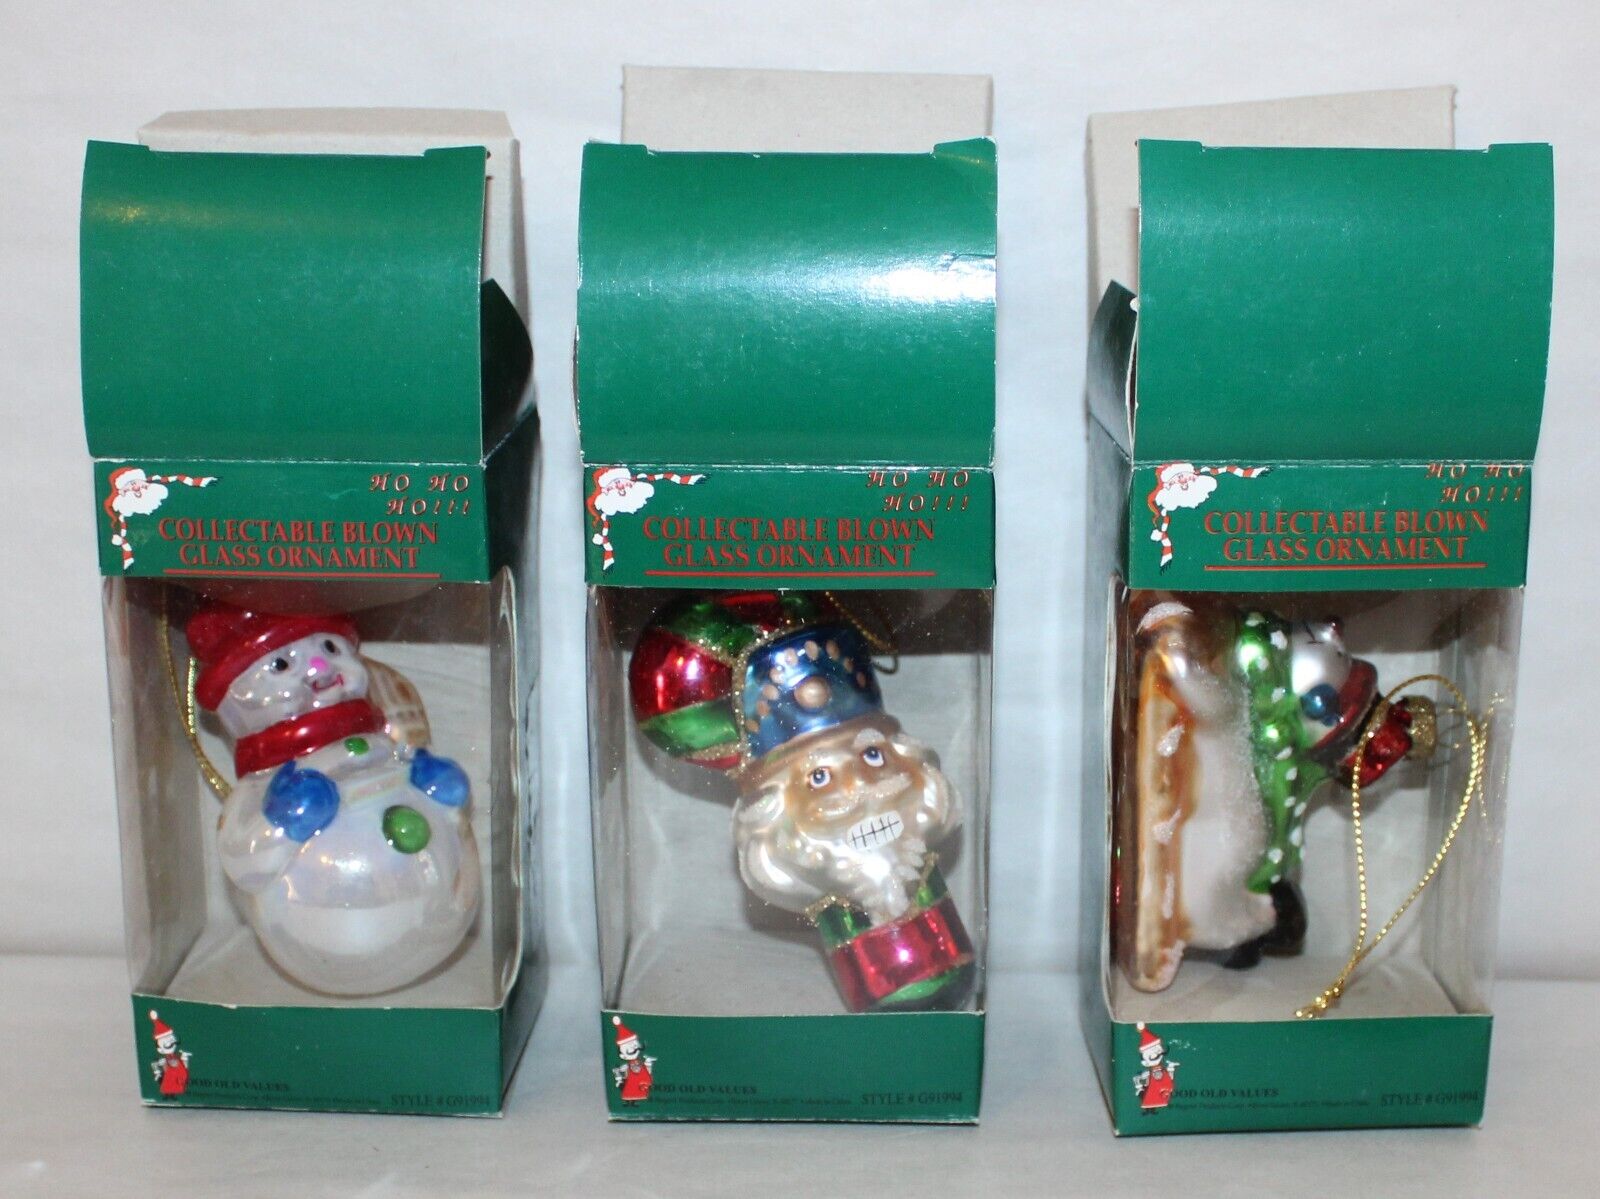 3 Collectable Hand Painted Blown Glass Christmas Tree Ornaments In Box NOS #C4